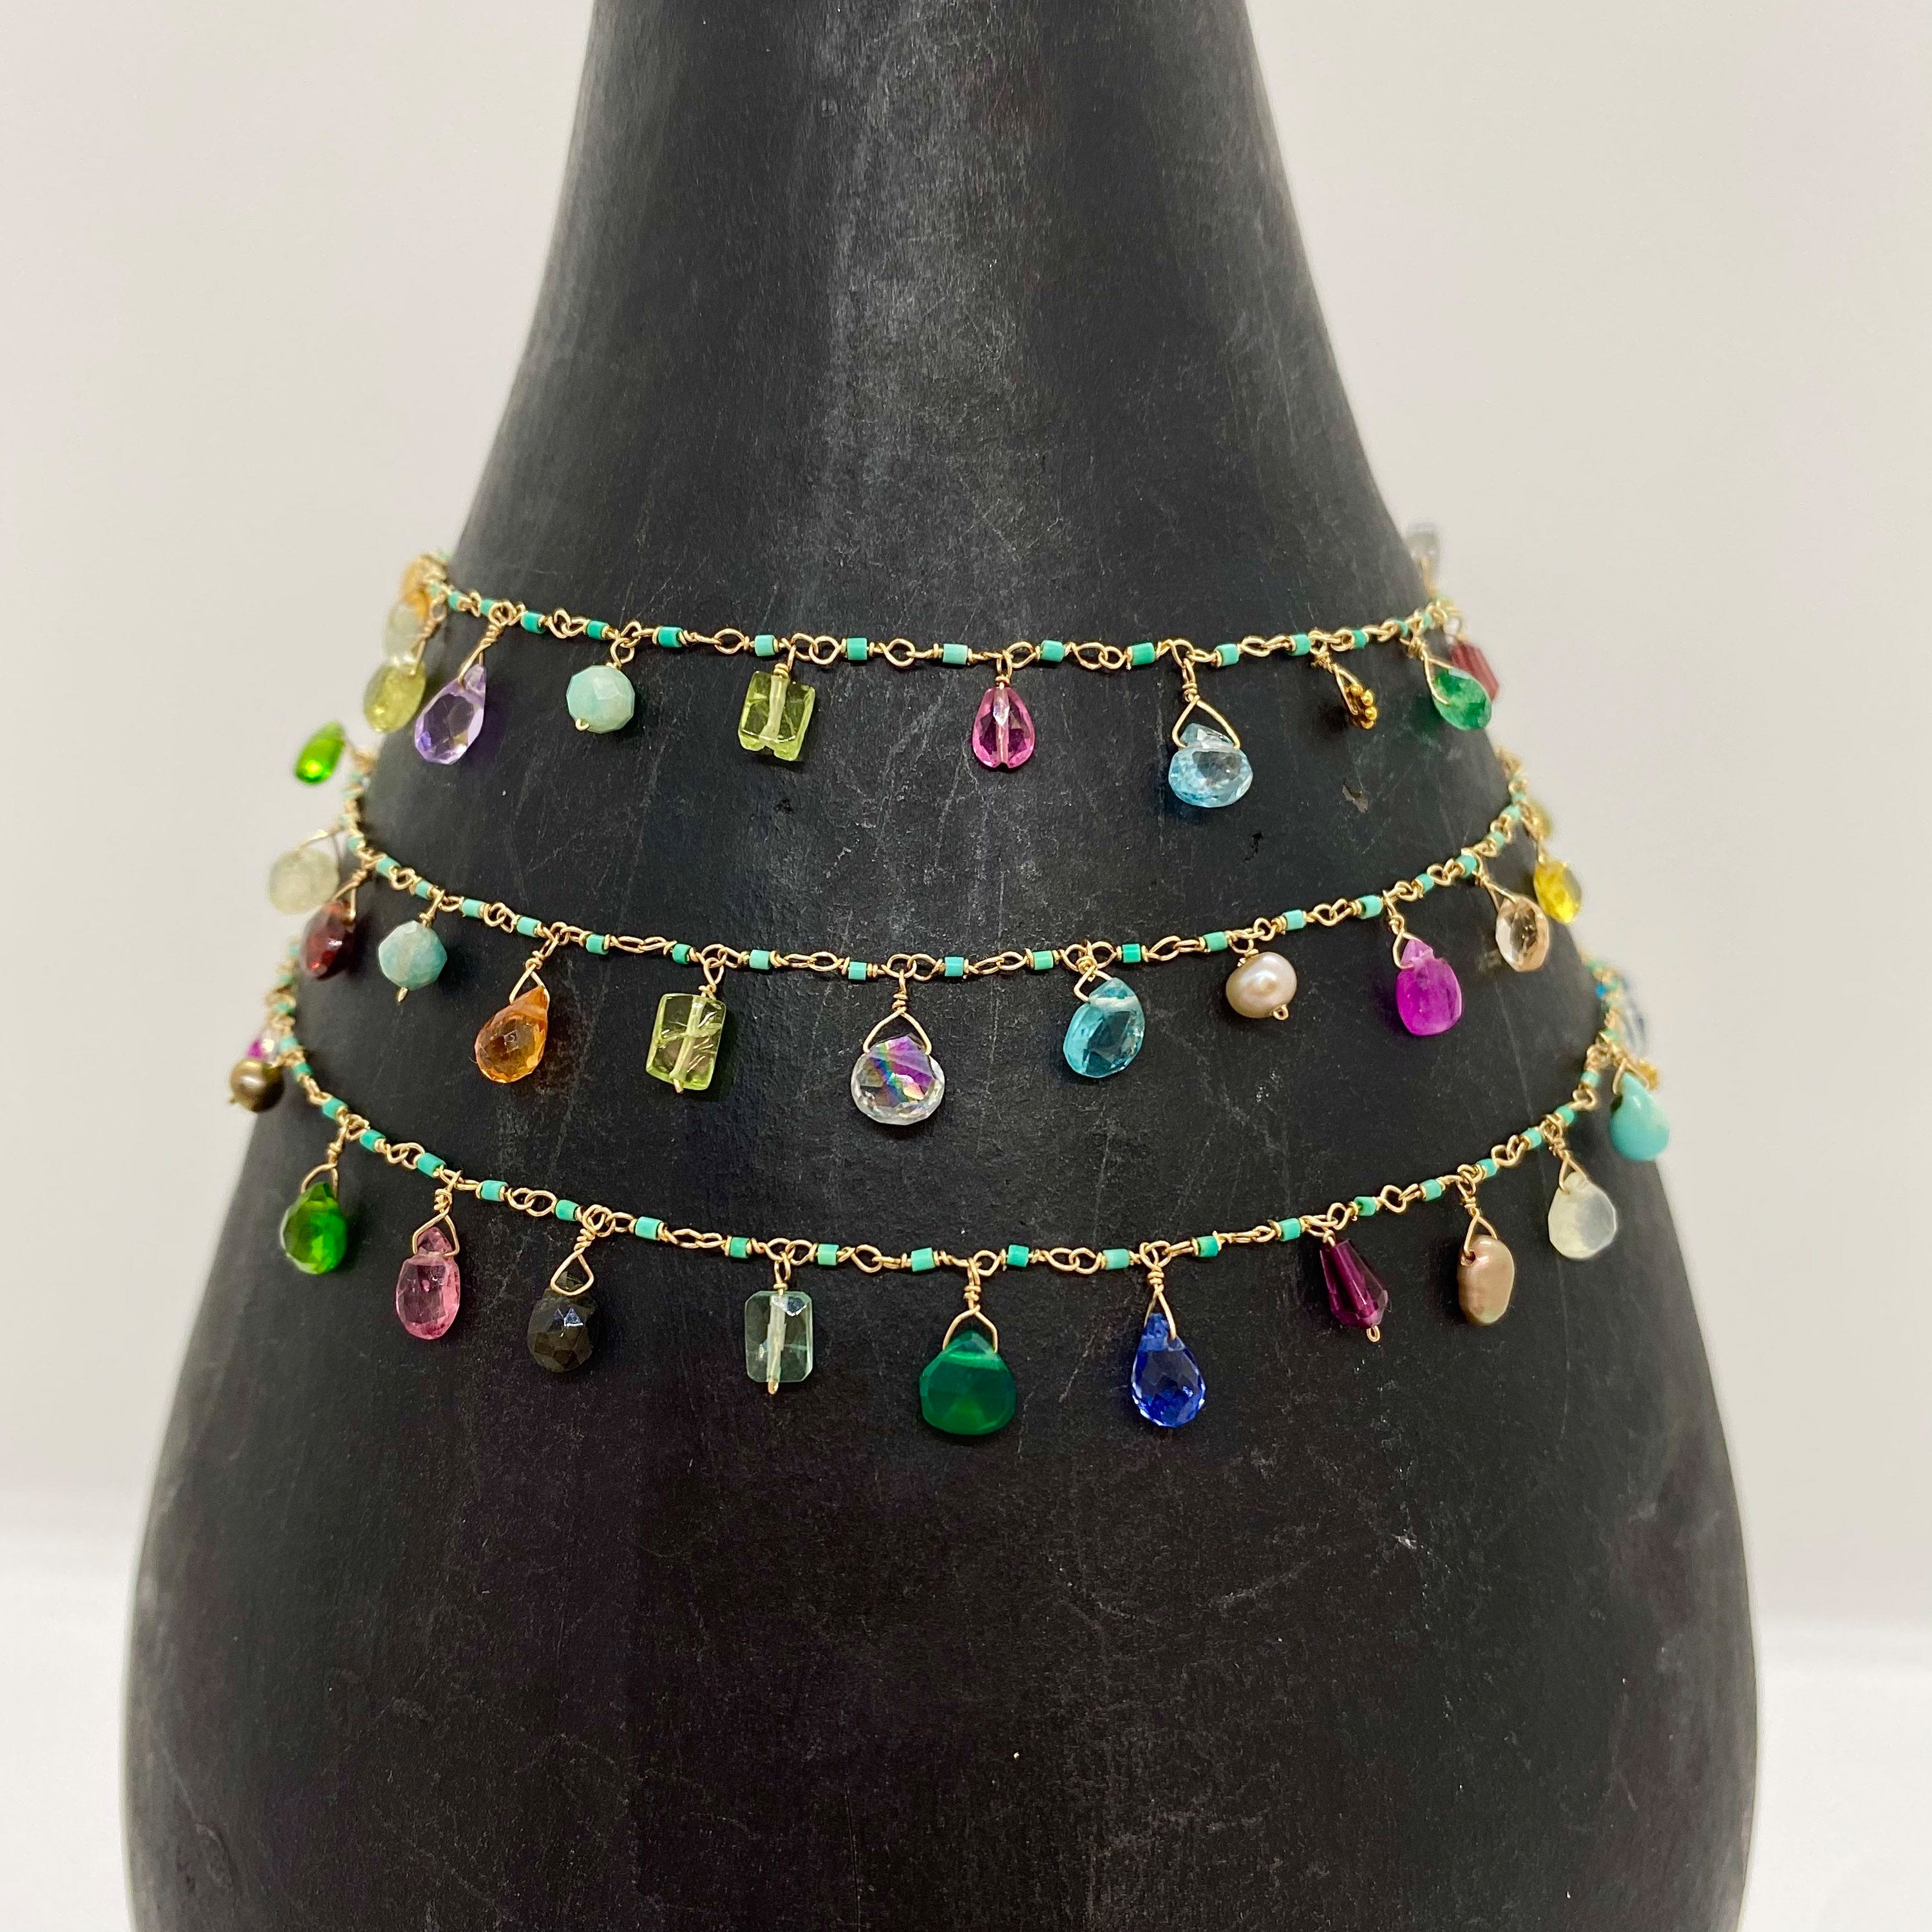 14k Gold Necklace w/ Afghan Turquoise, Precious Stones, Semi-Precious Stones & 18k Gold Daisies